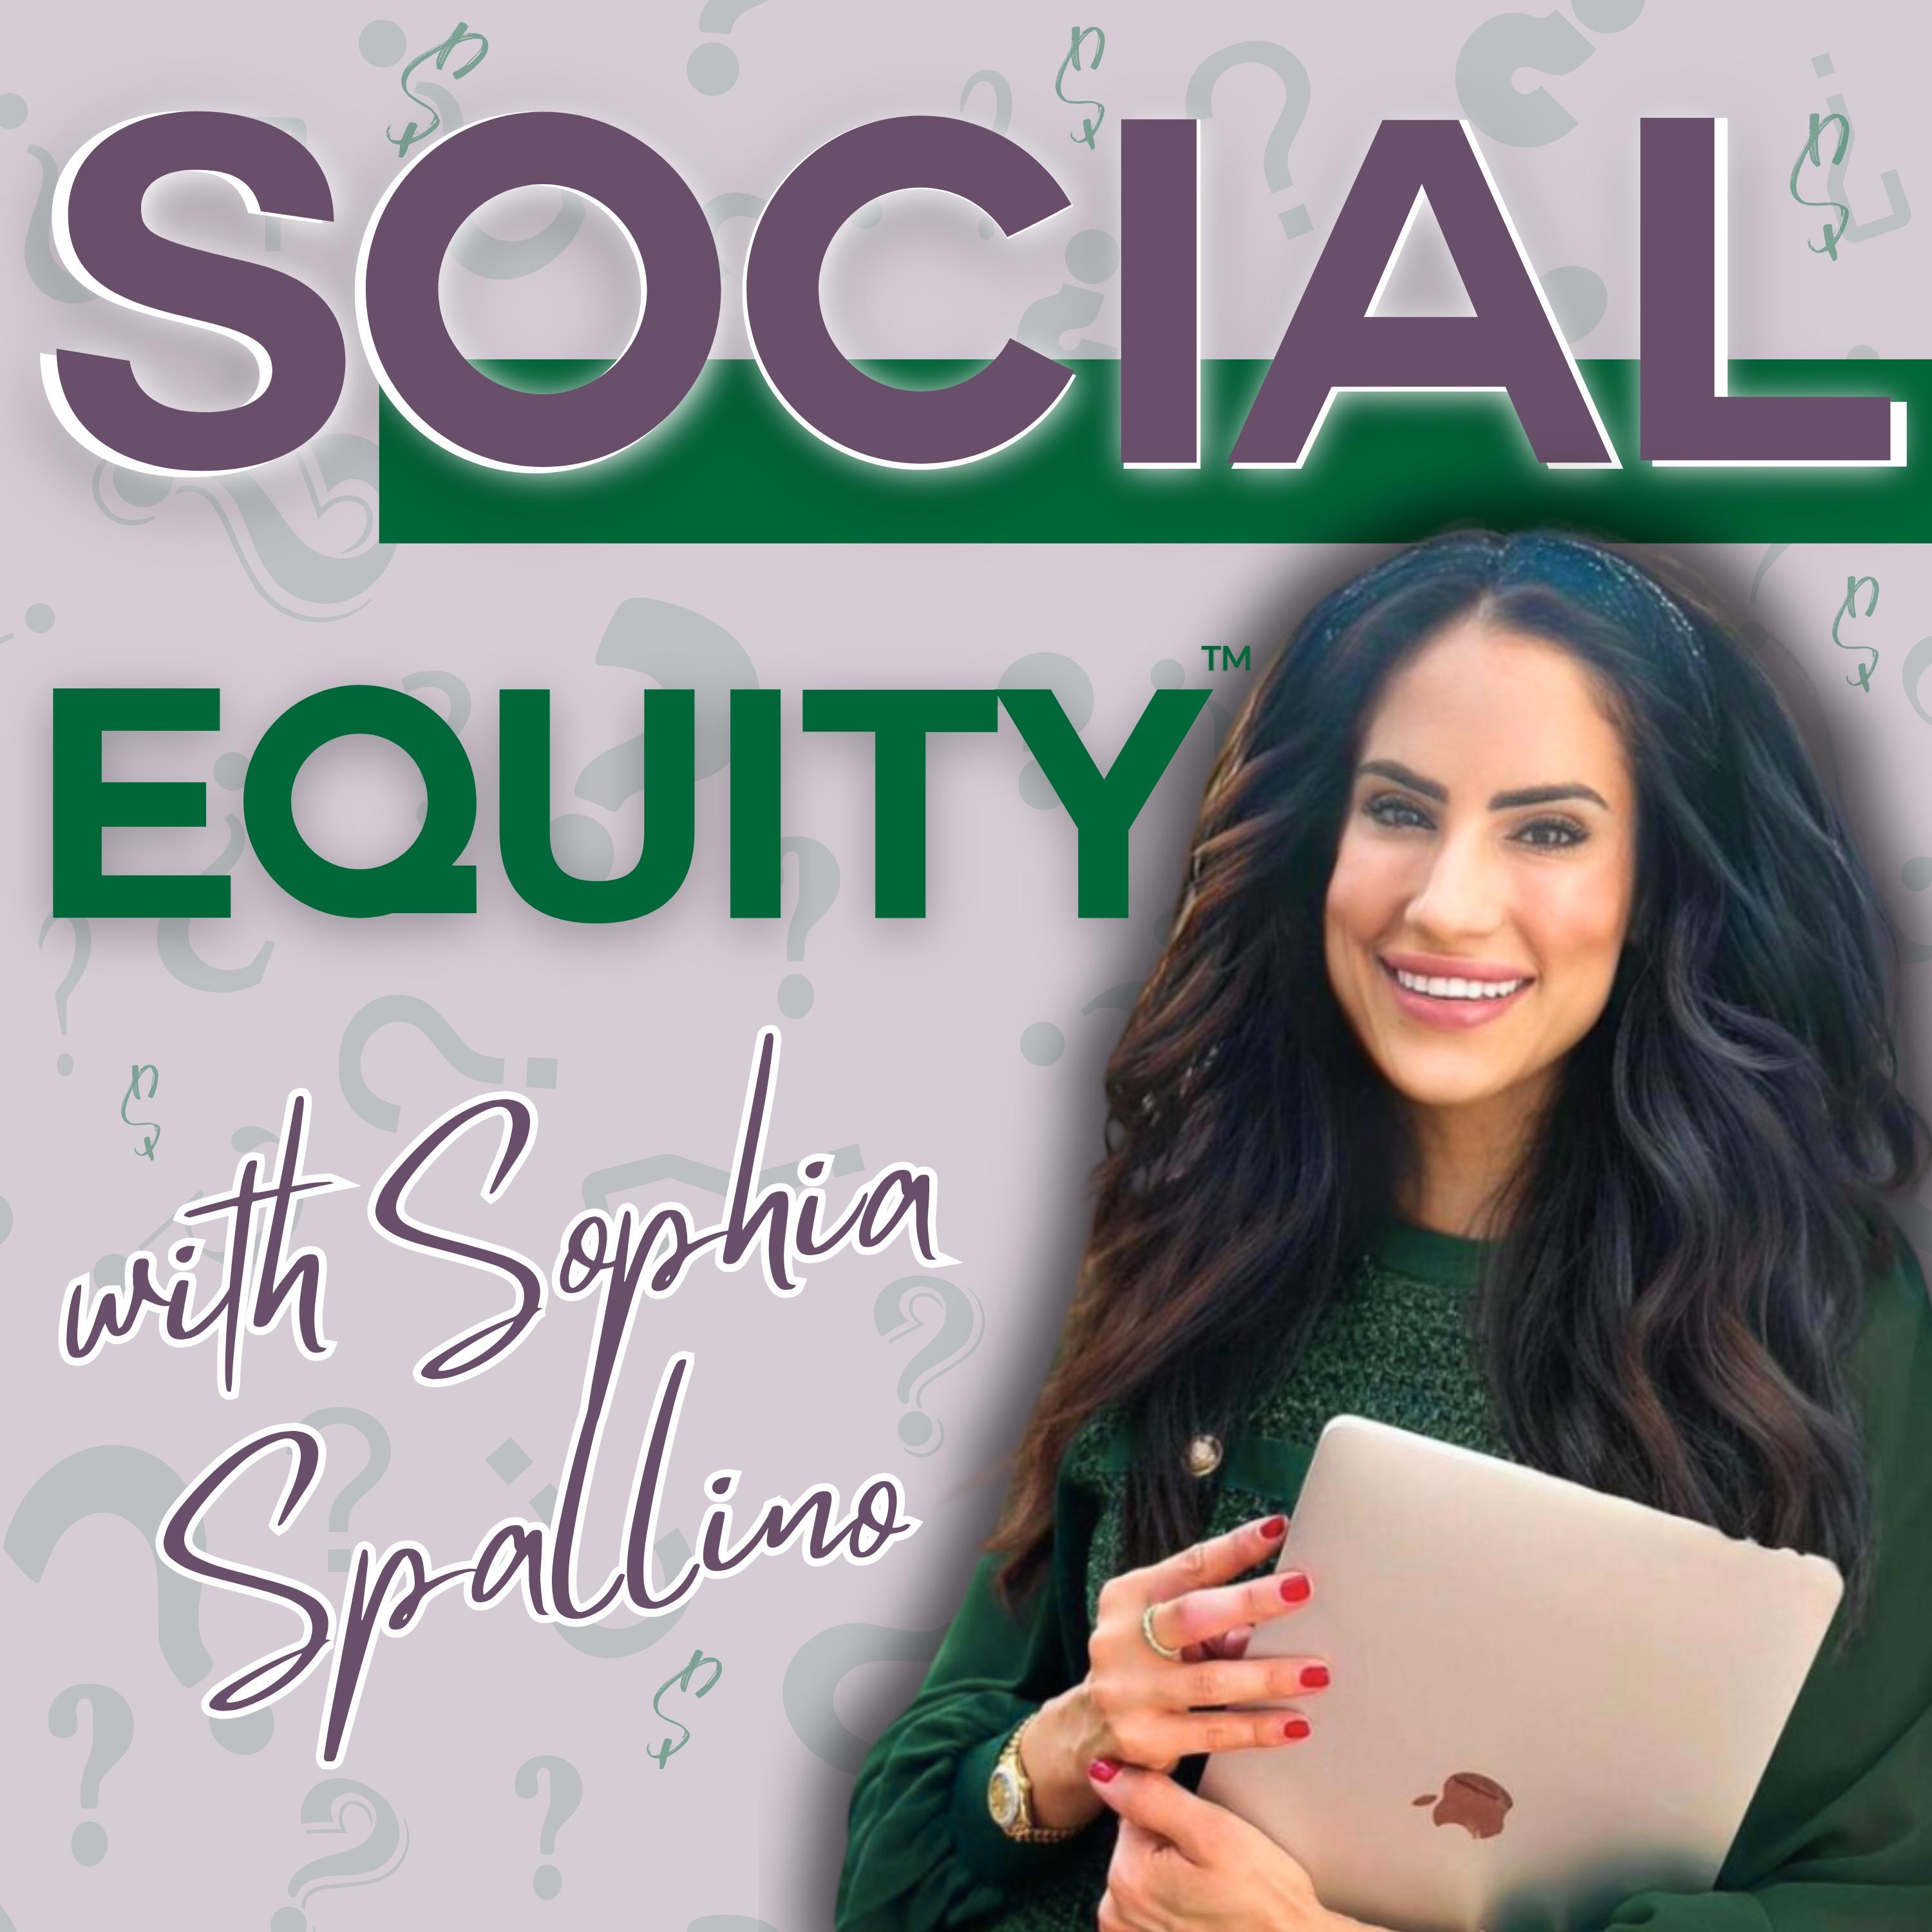 SOCIAL EQUITY™ with Sophia Spallino | Build a Profitable Personal Brand™ | Social Media Strategy | Female Entrepreneur Mindset | Online Coaching Industry 